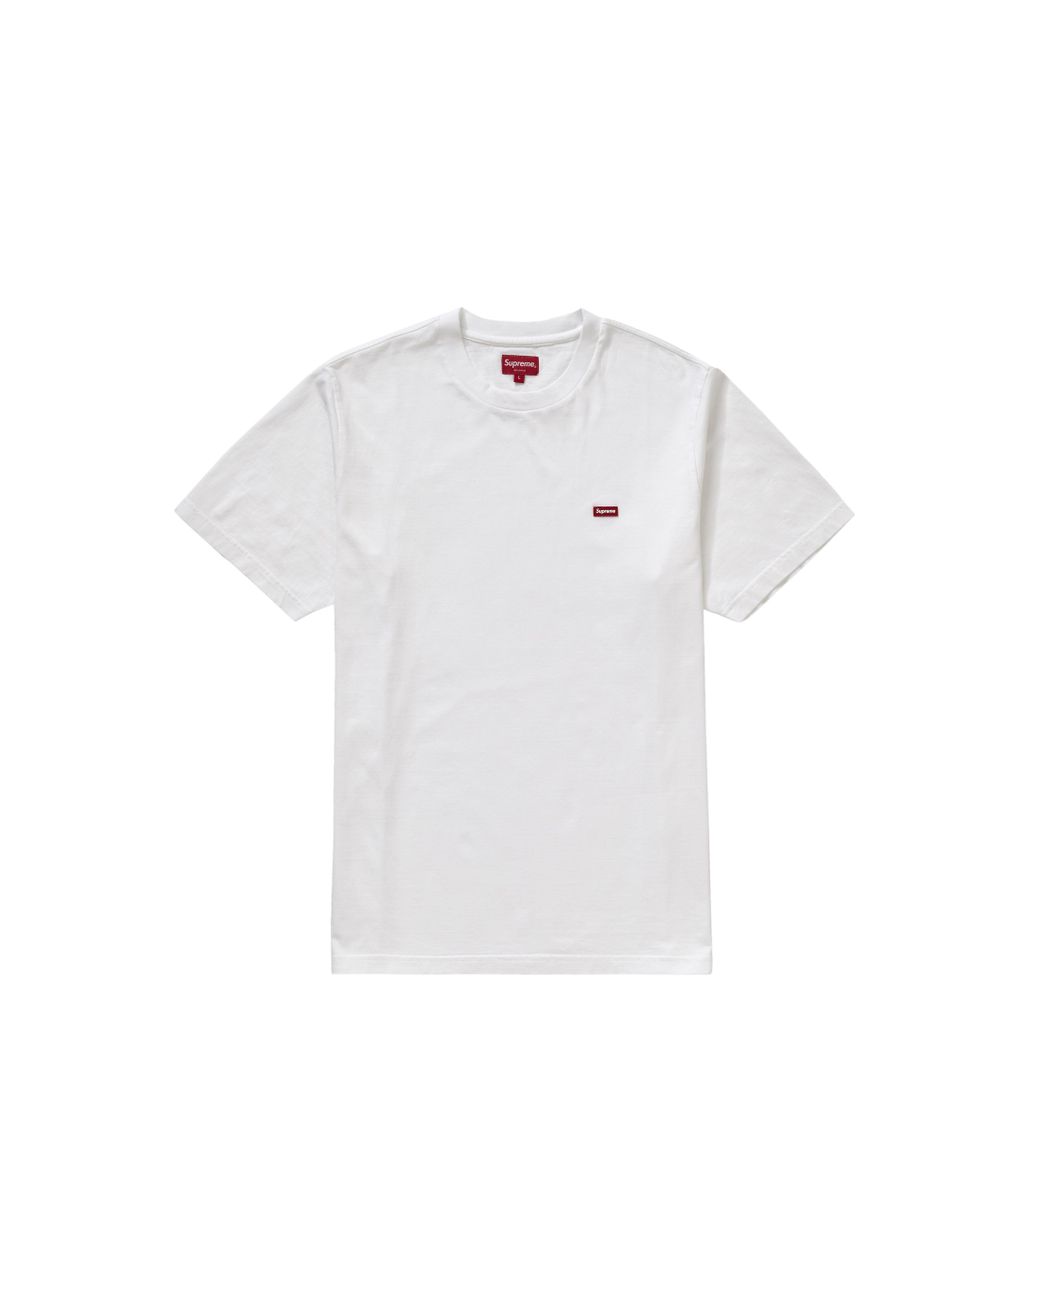 Supreme Small Box Tee (ss19) in White for Men - Lyst